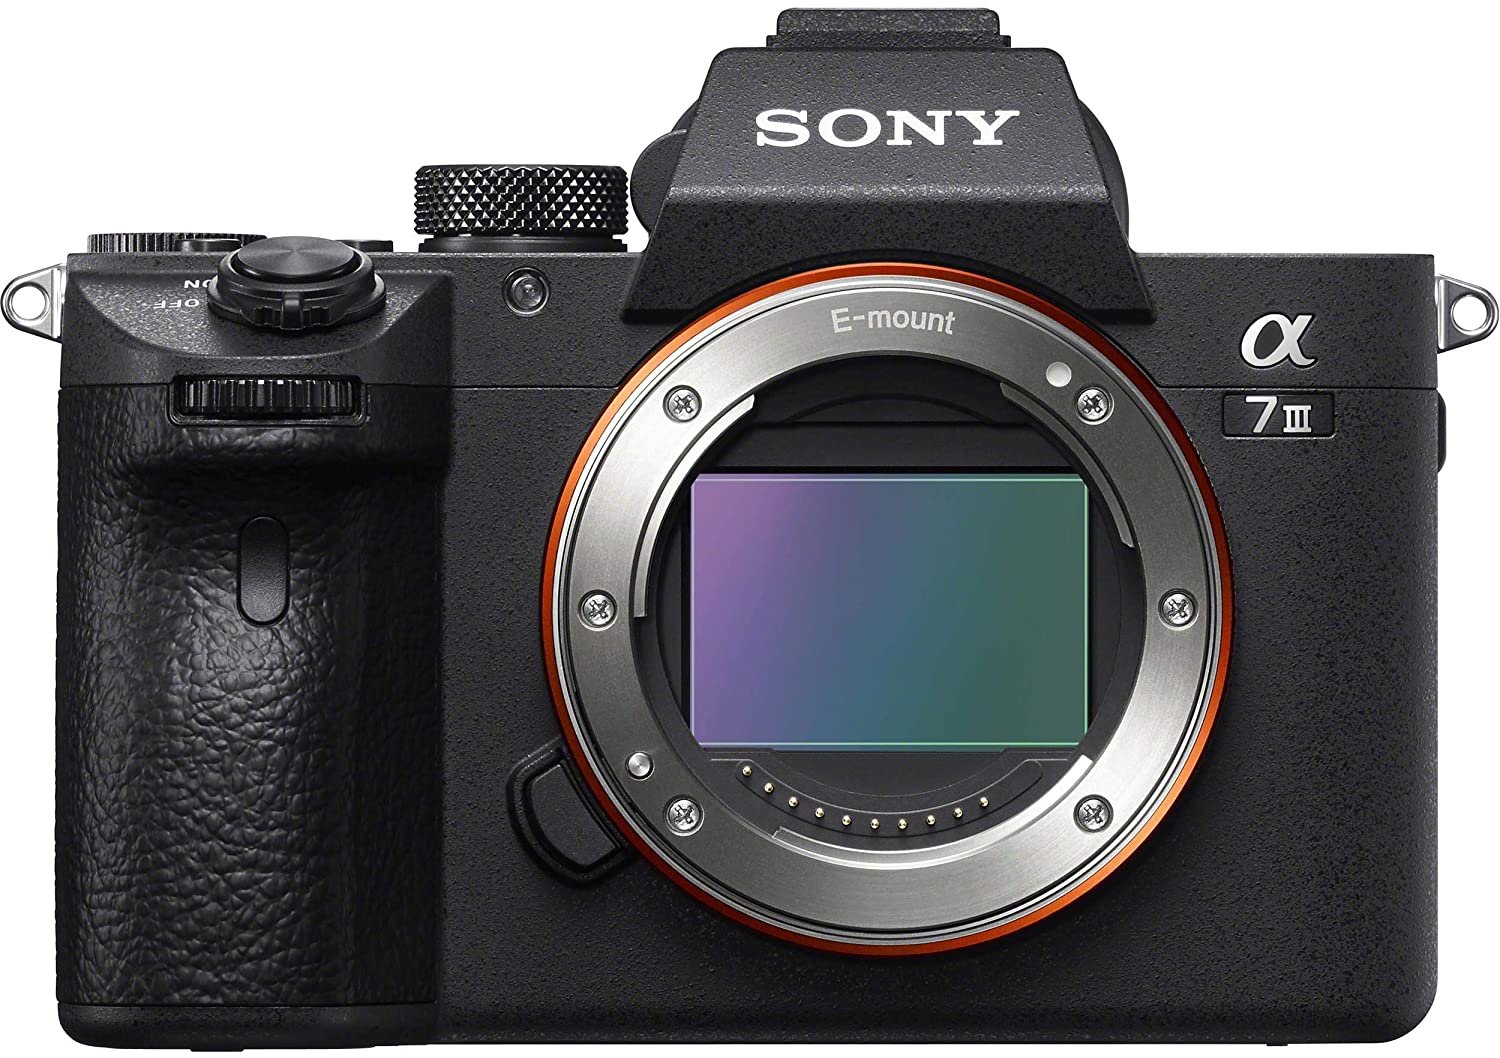 Body of Sony A7 III as a best camera for concert photography